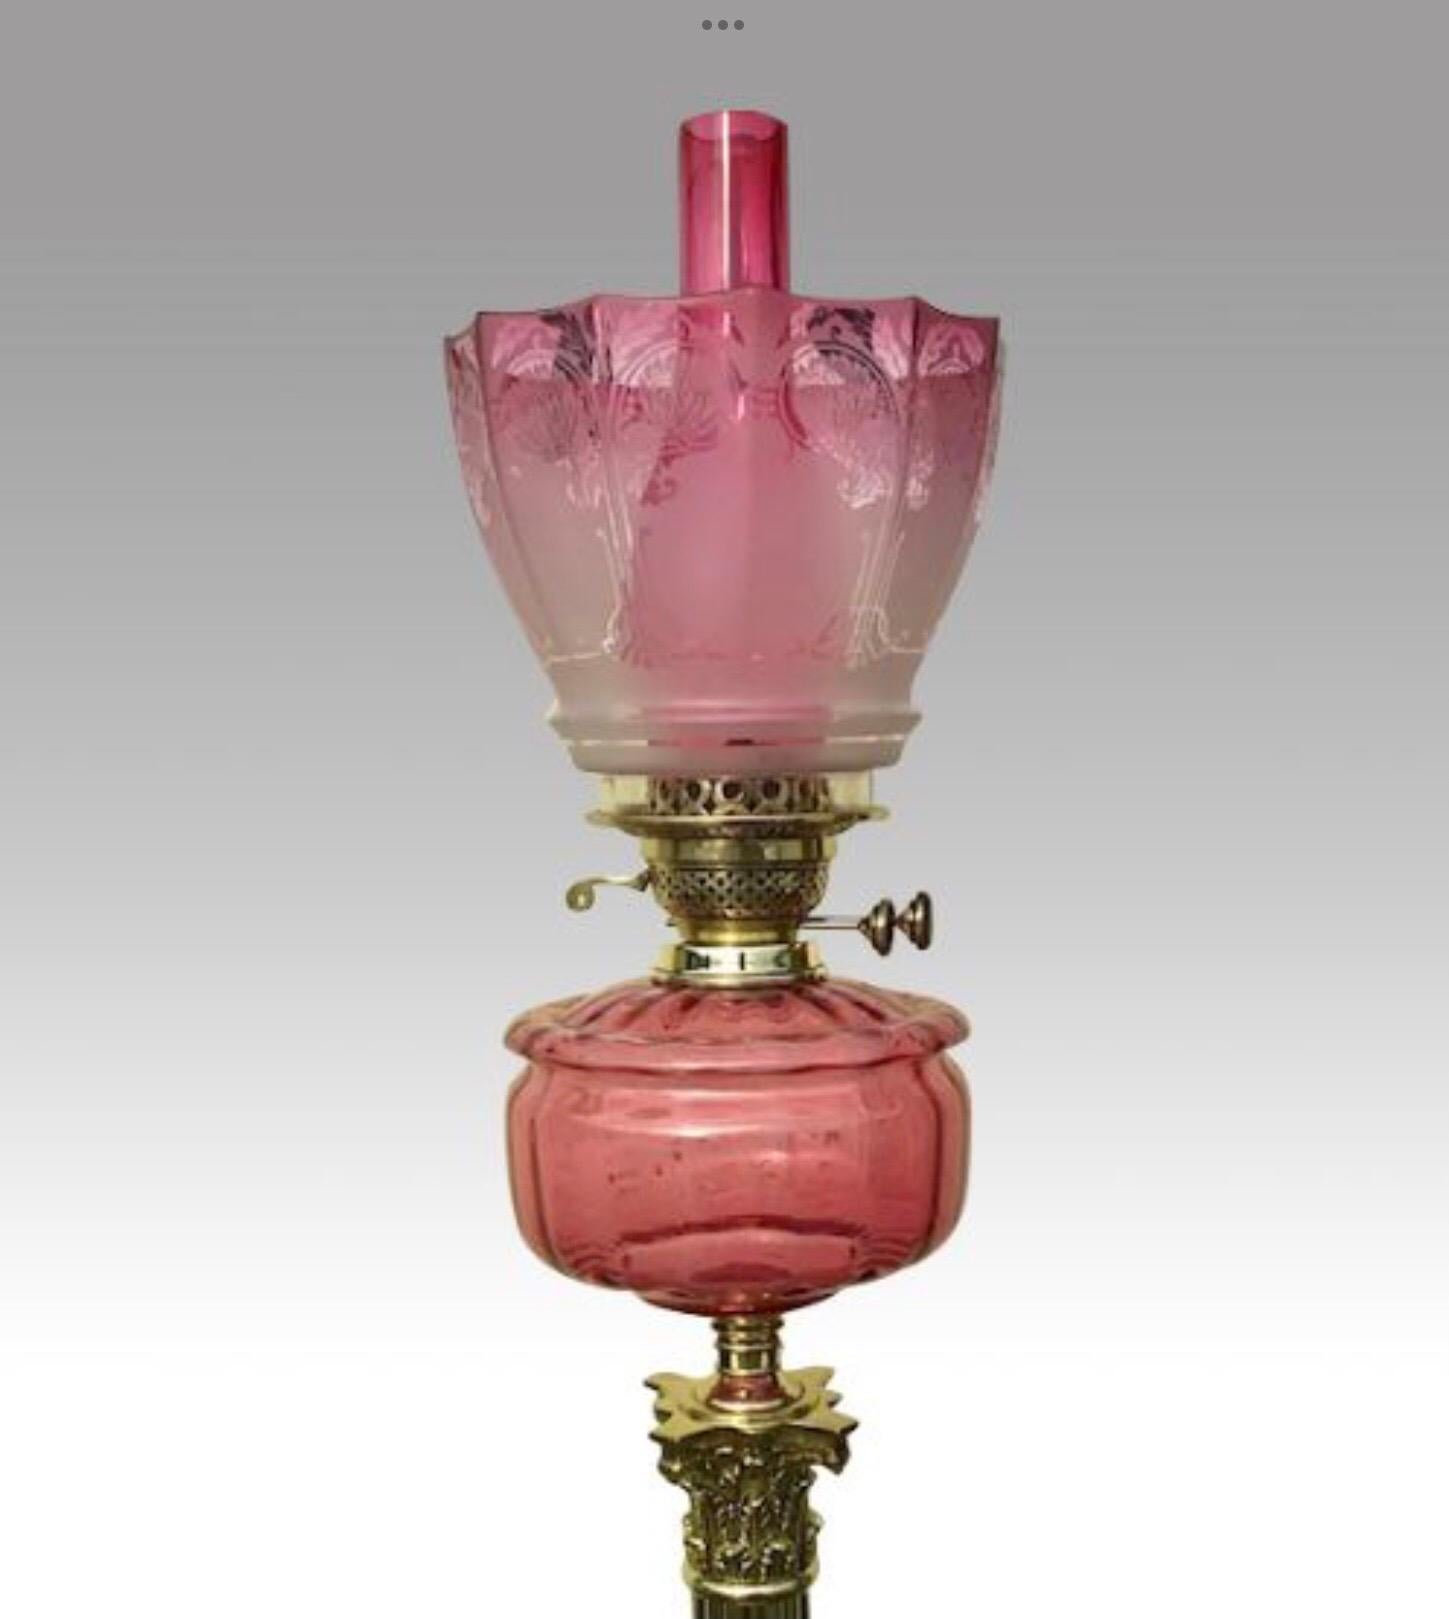 Superb tall antique brass Corinthian column oil lamp with cranberry ruby glass bowl and etched ruby glass etched shade
double burner and fabulous base.
C1890
Measures: 37 ins x 9 ins x 9 ins.